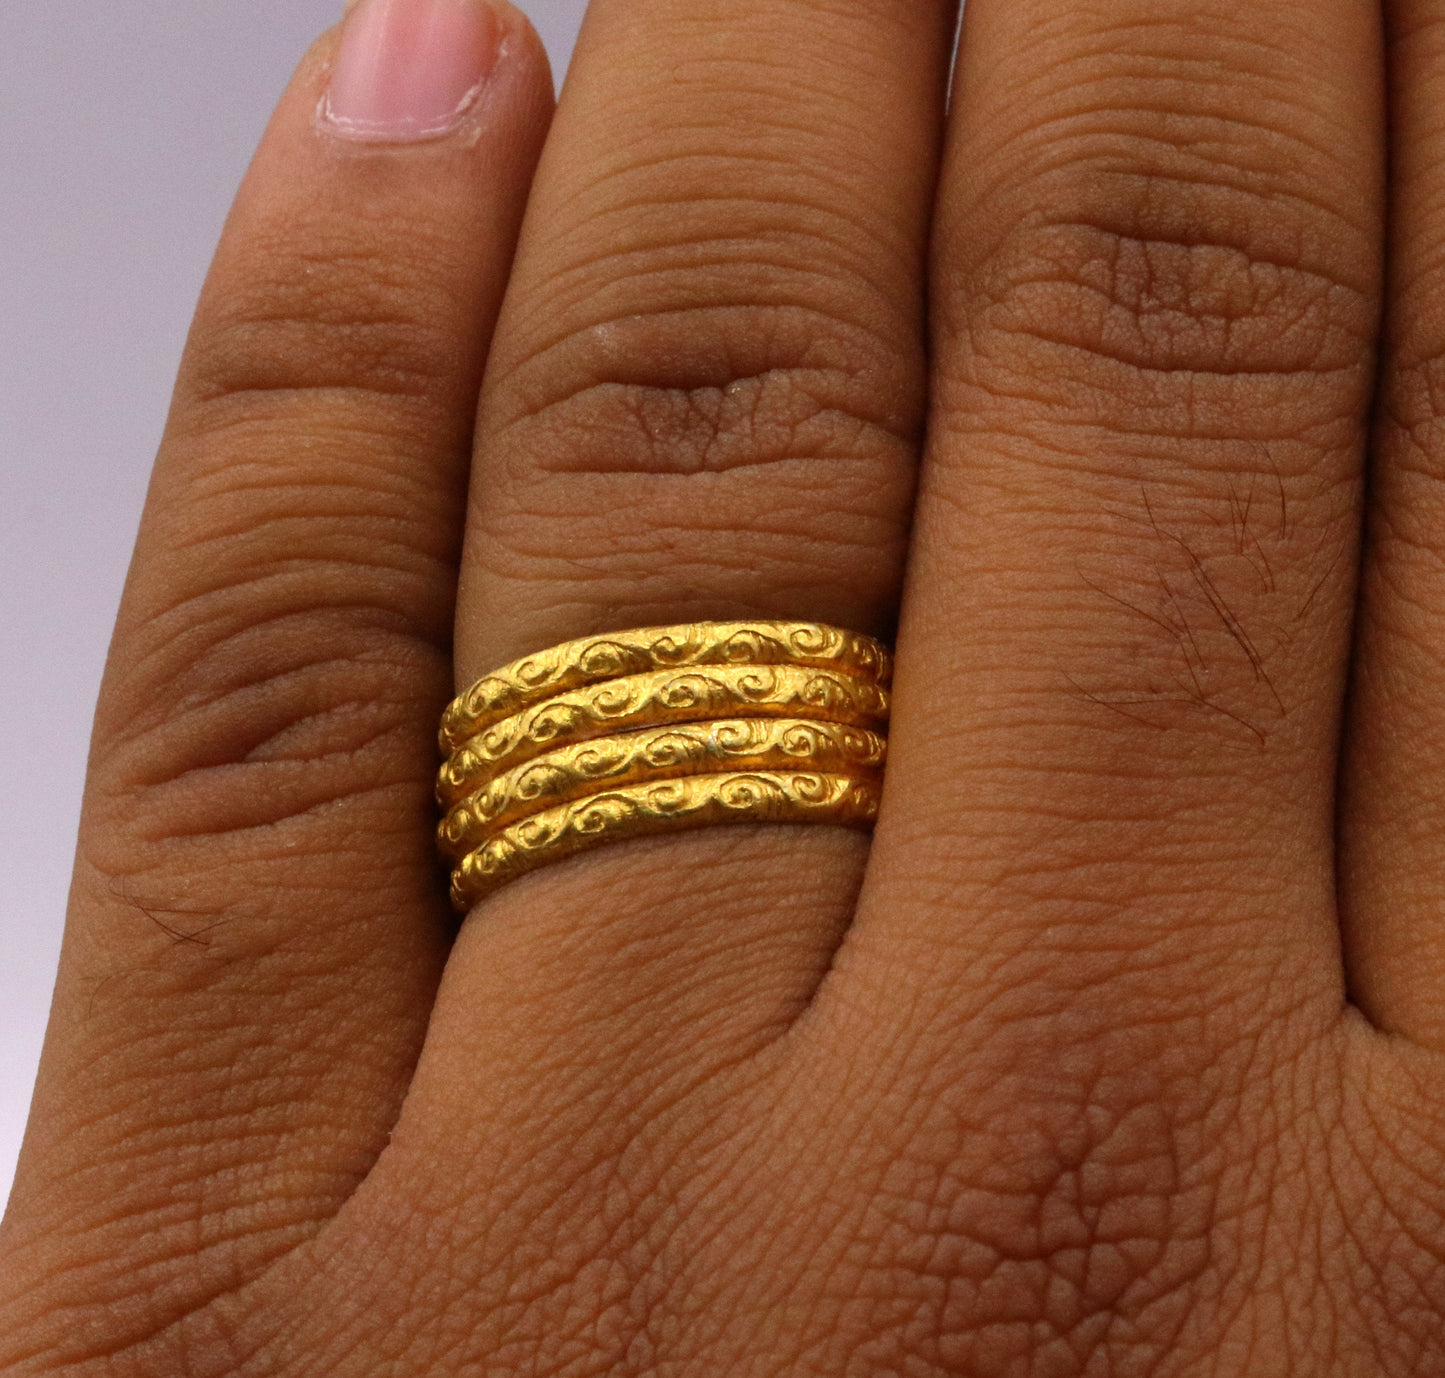 Certified solid 22kt carat yellow gold handmade unique traditional antique design ring band indian tribal jewelry unisex gifting item - TRIBAL ORNAMENTS